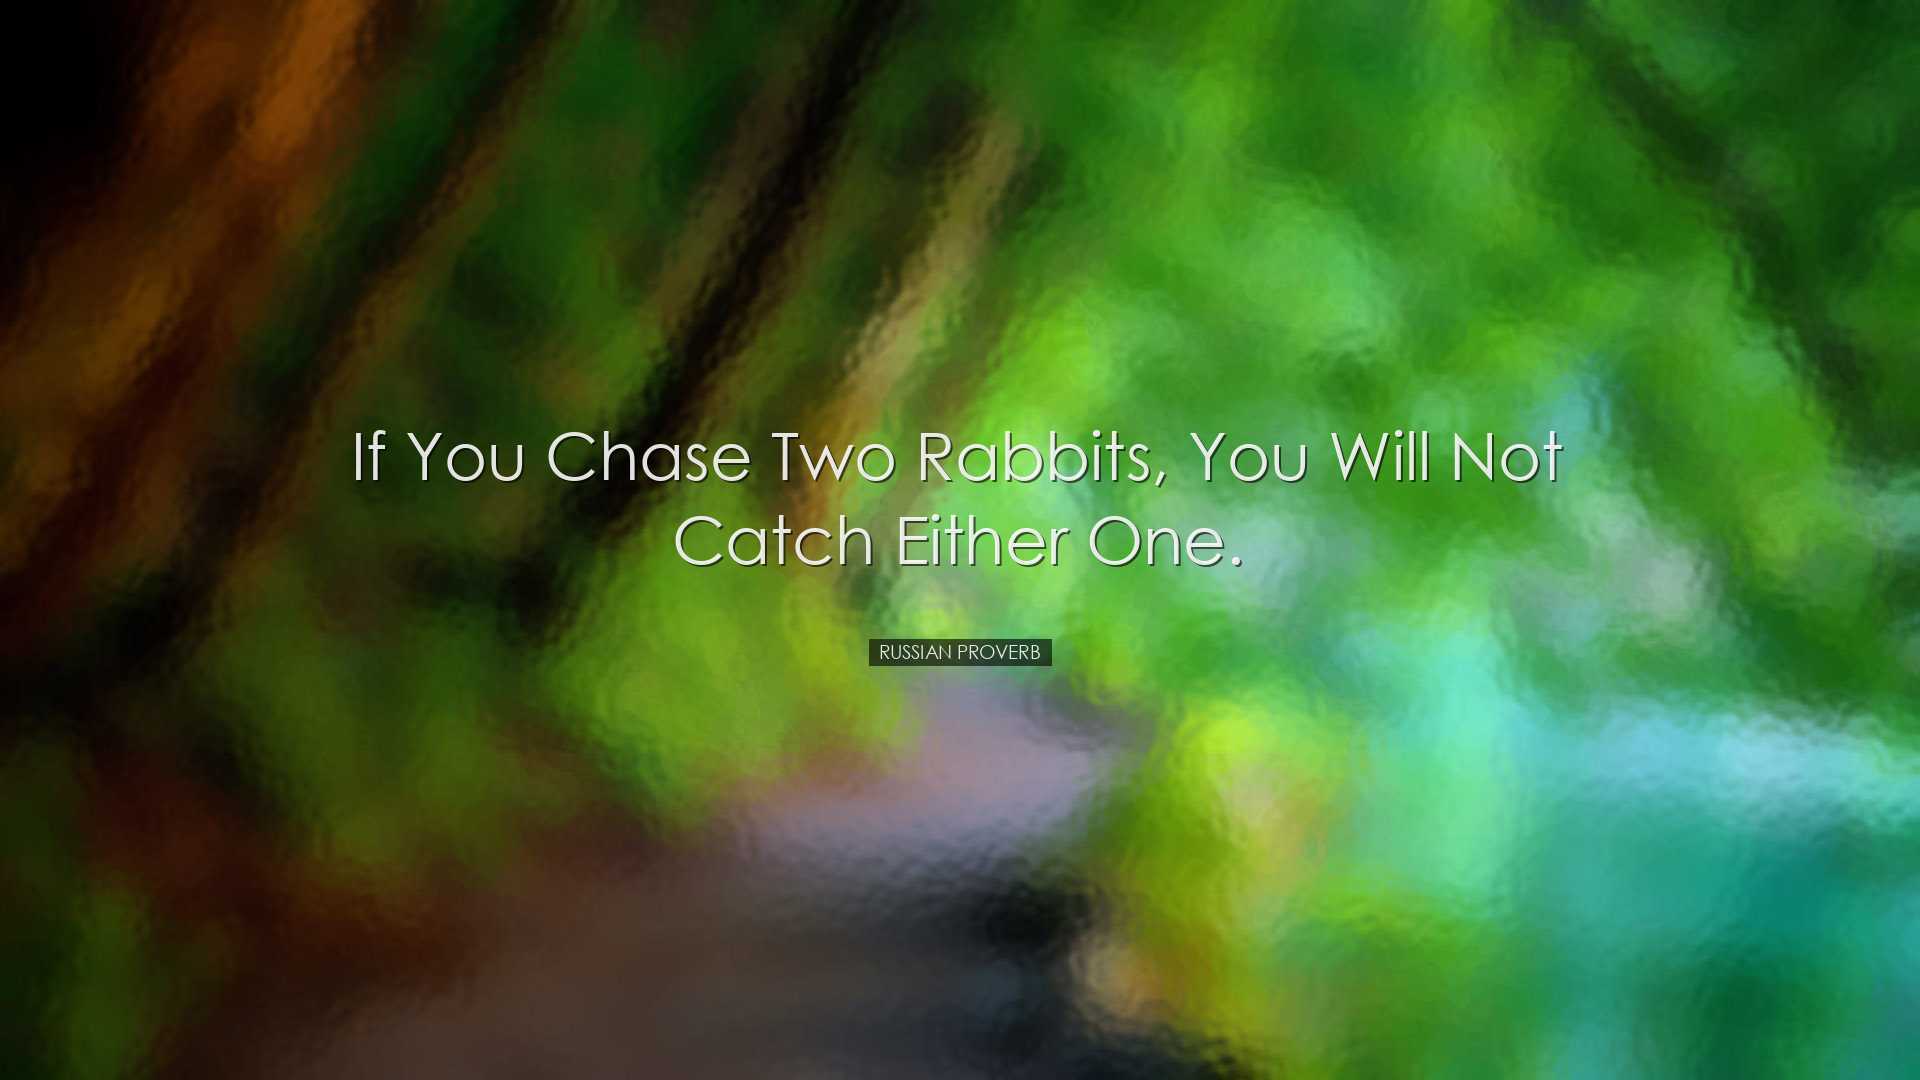 If you chase two rabbits, you will not catch either one. - Russian